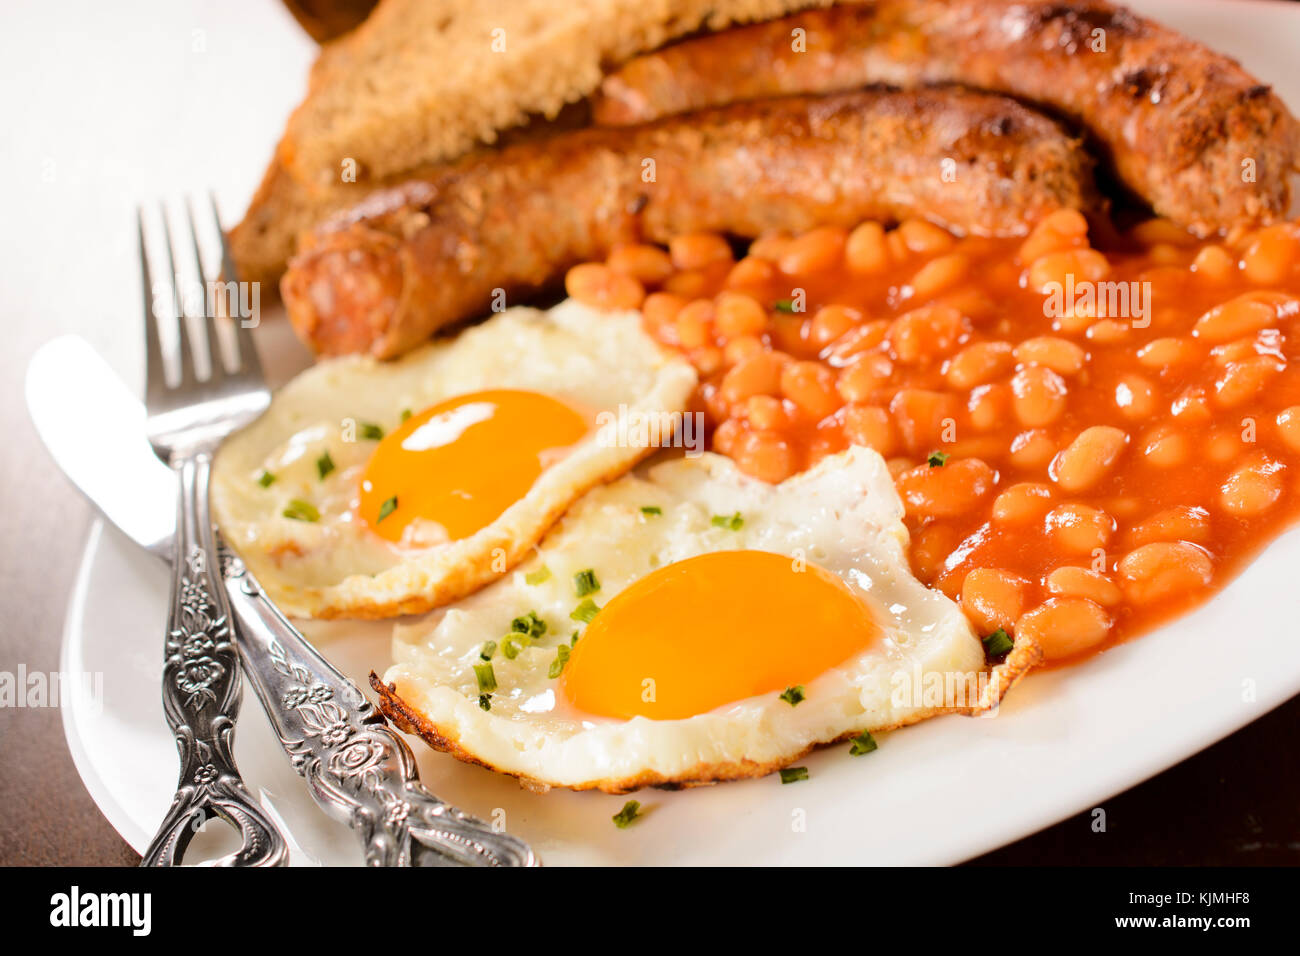 Eggs,beans and sausage in the plate.Selective focus on the front egg Stock Photo